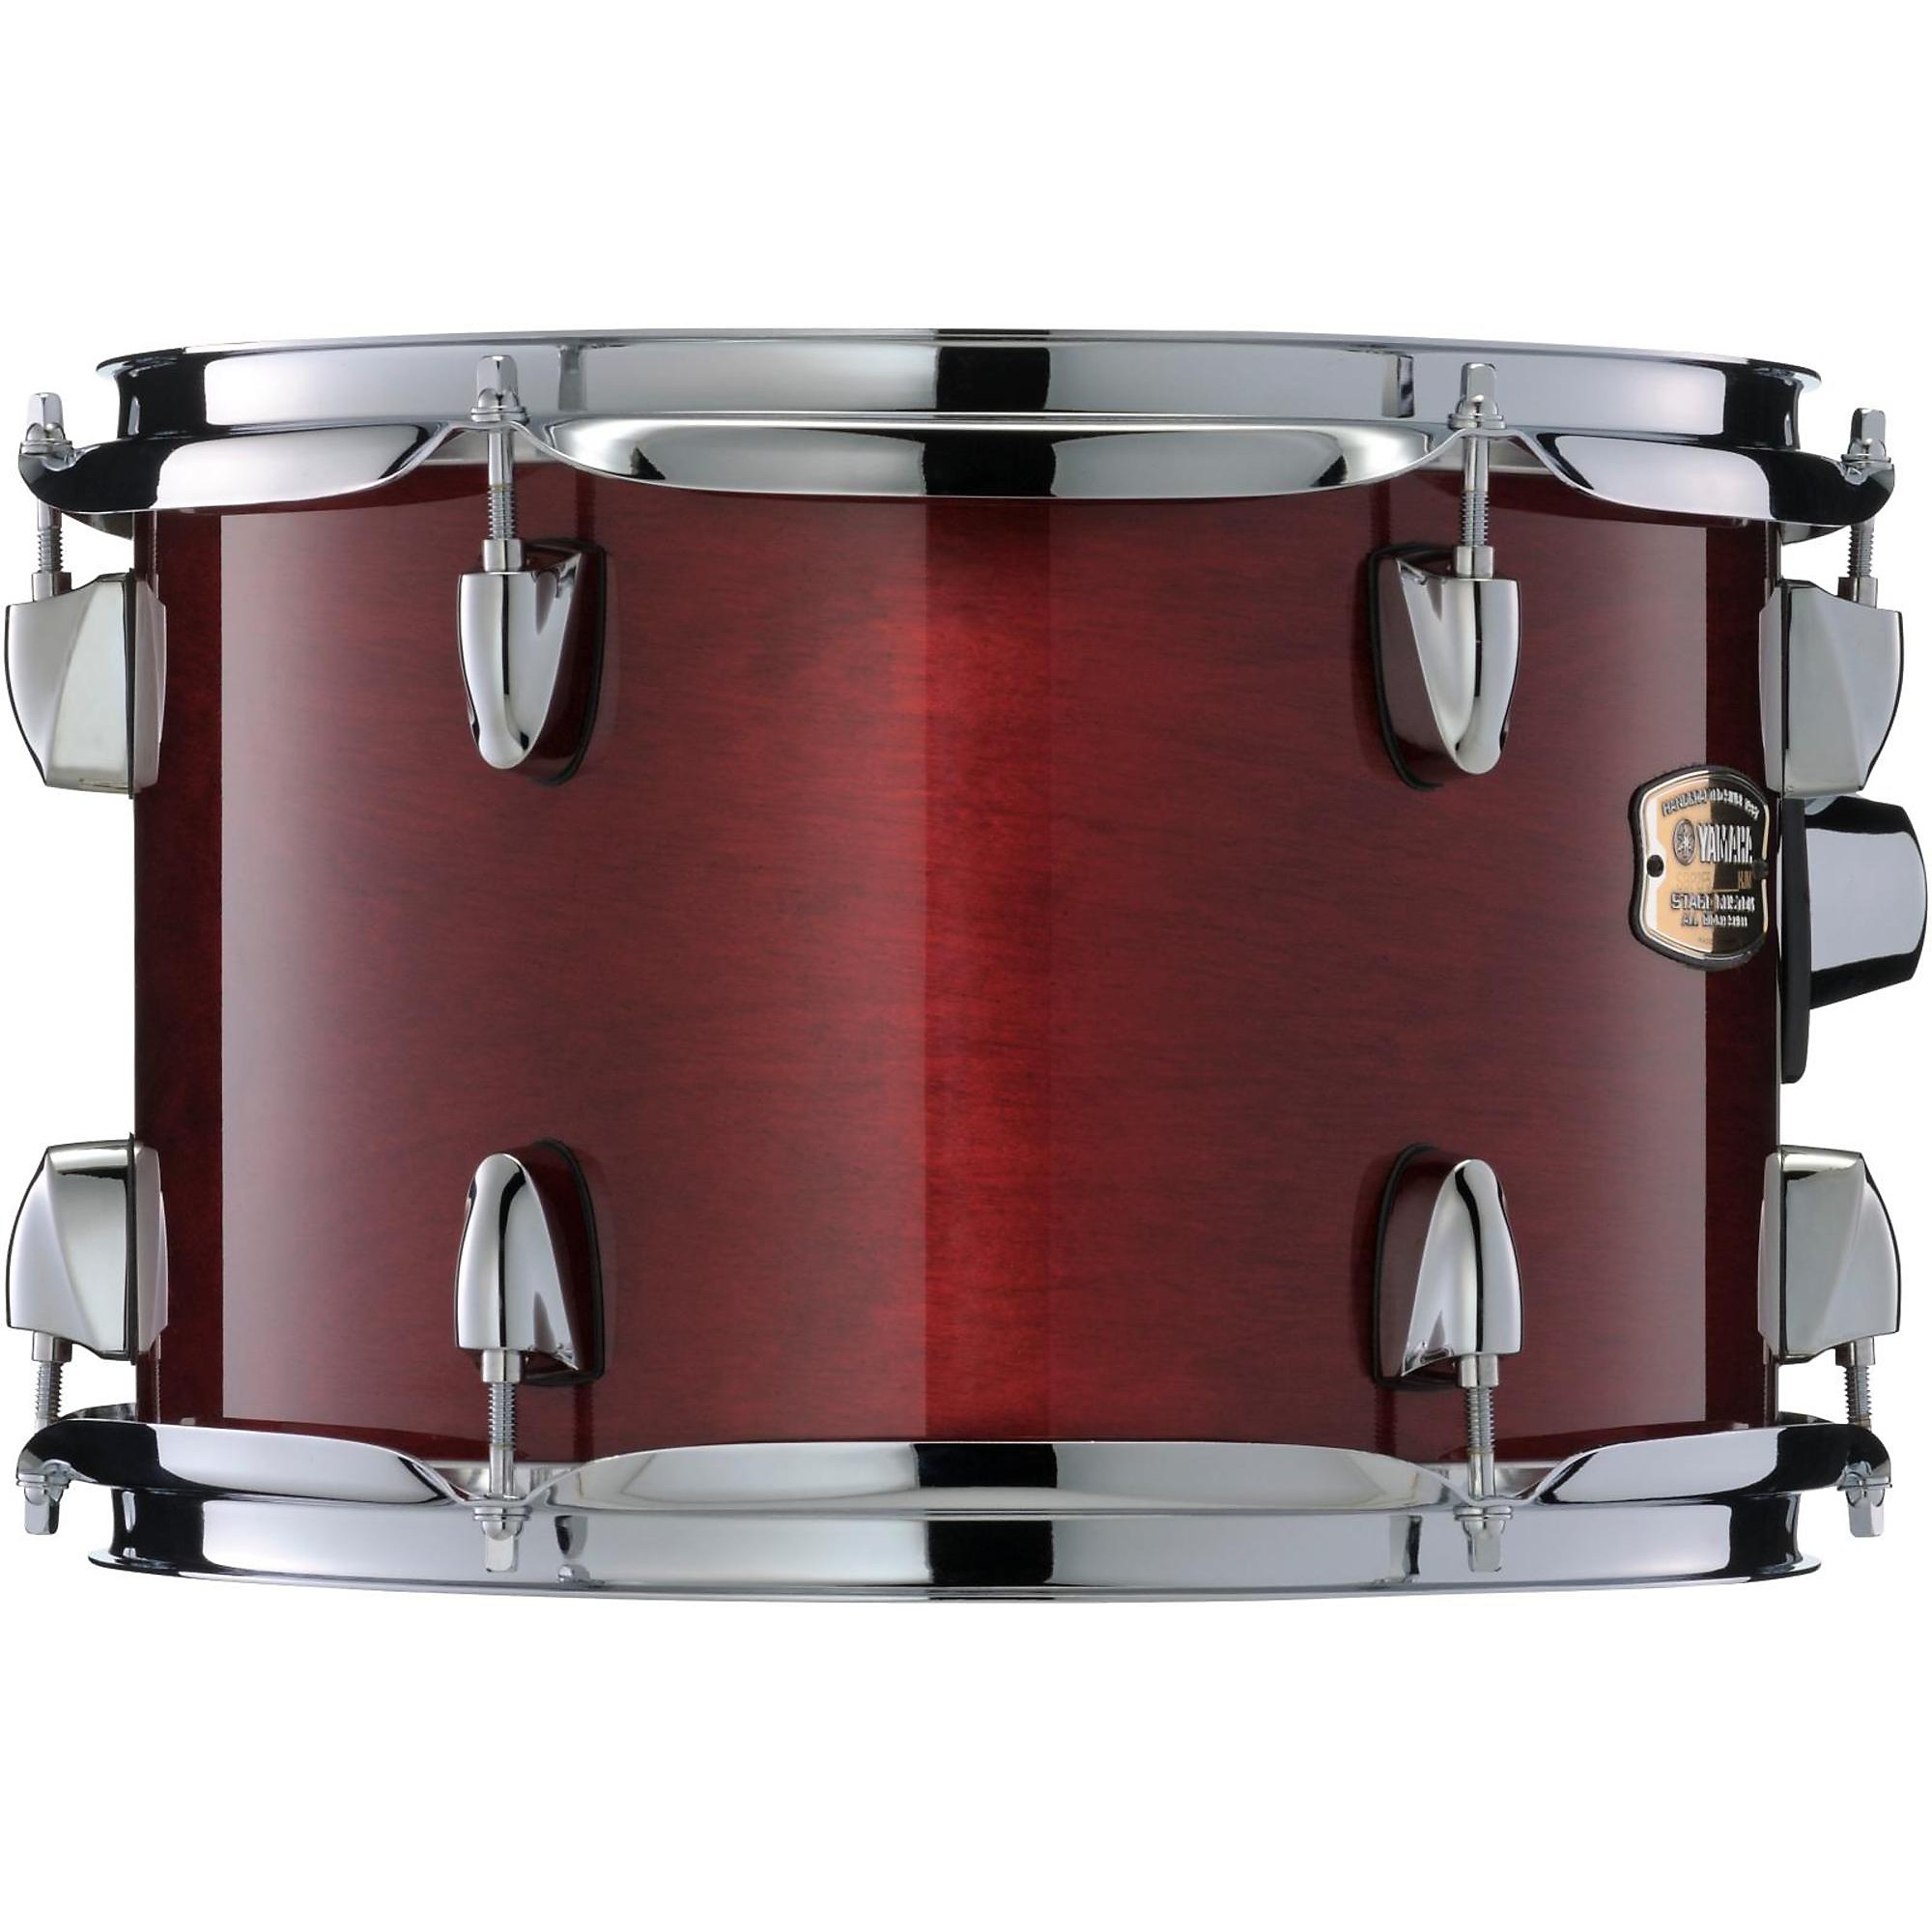 Yamaha Stage Custom Birch Tom 12 x 8 in. Cranberry Red | Guitar Center